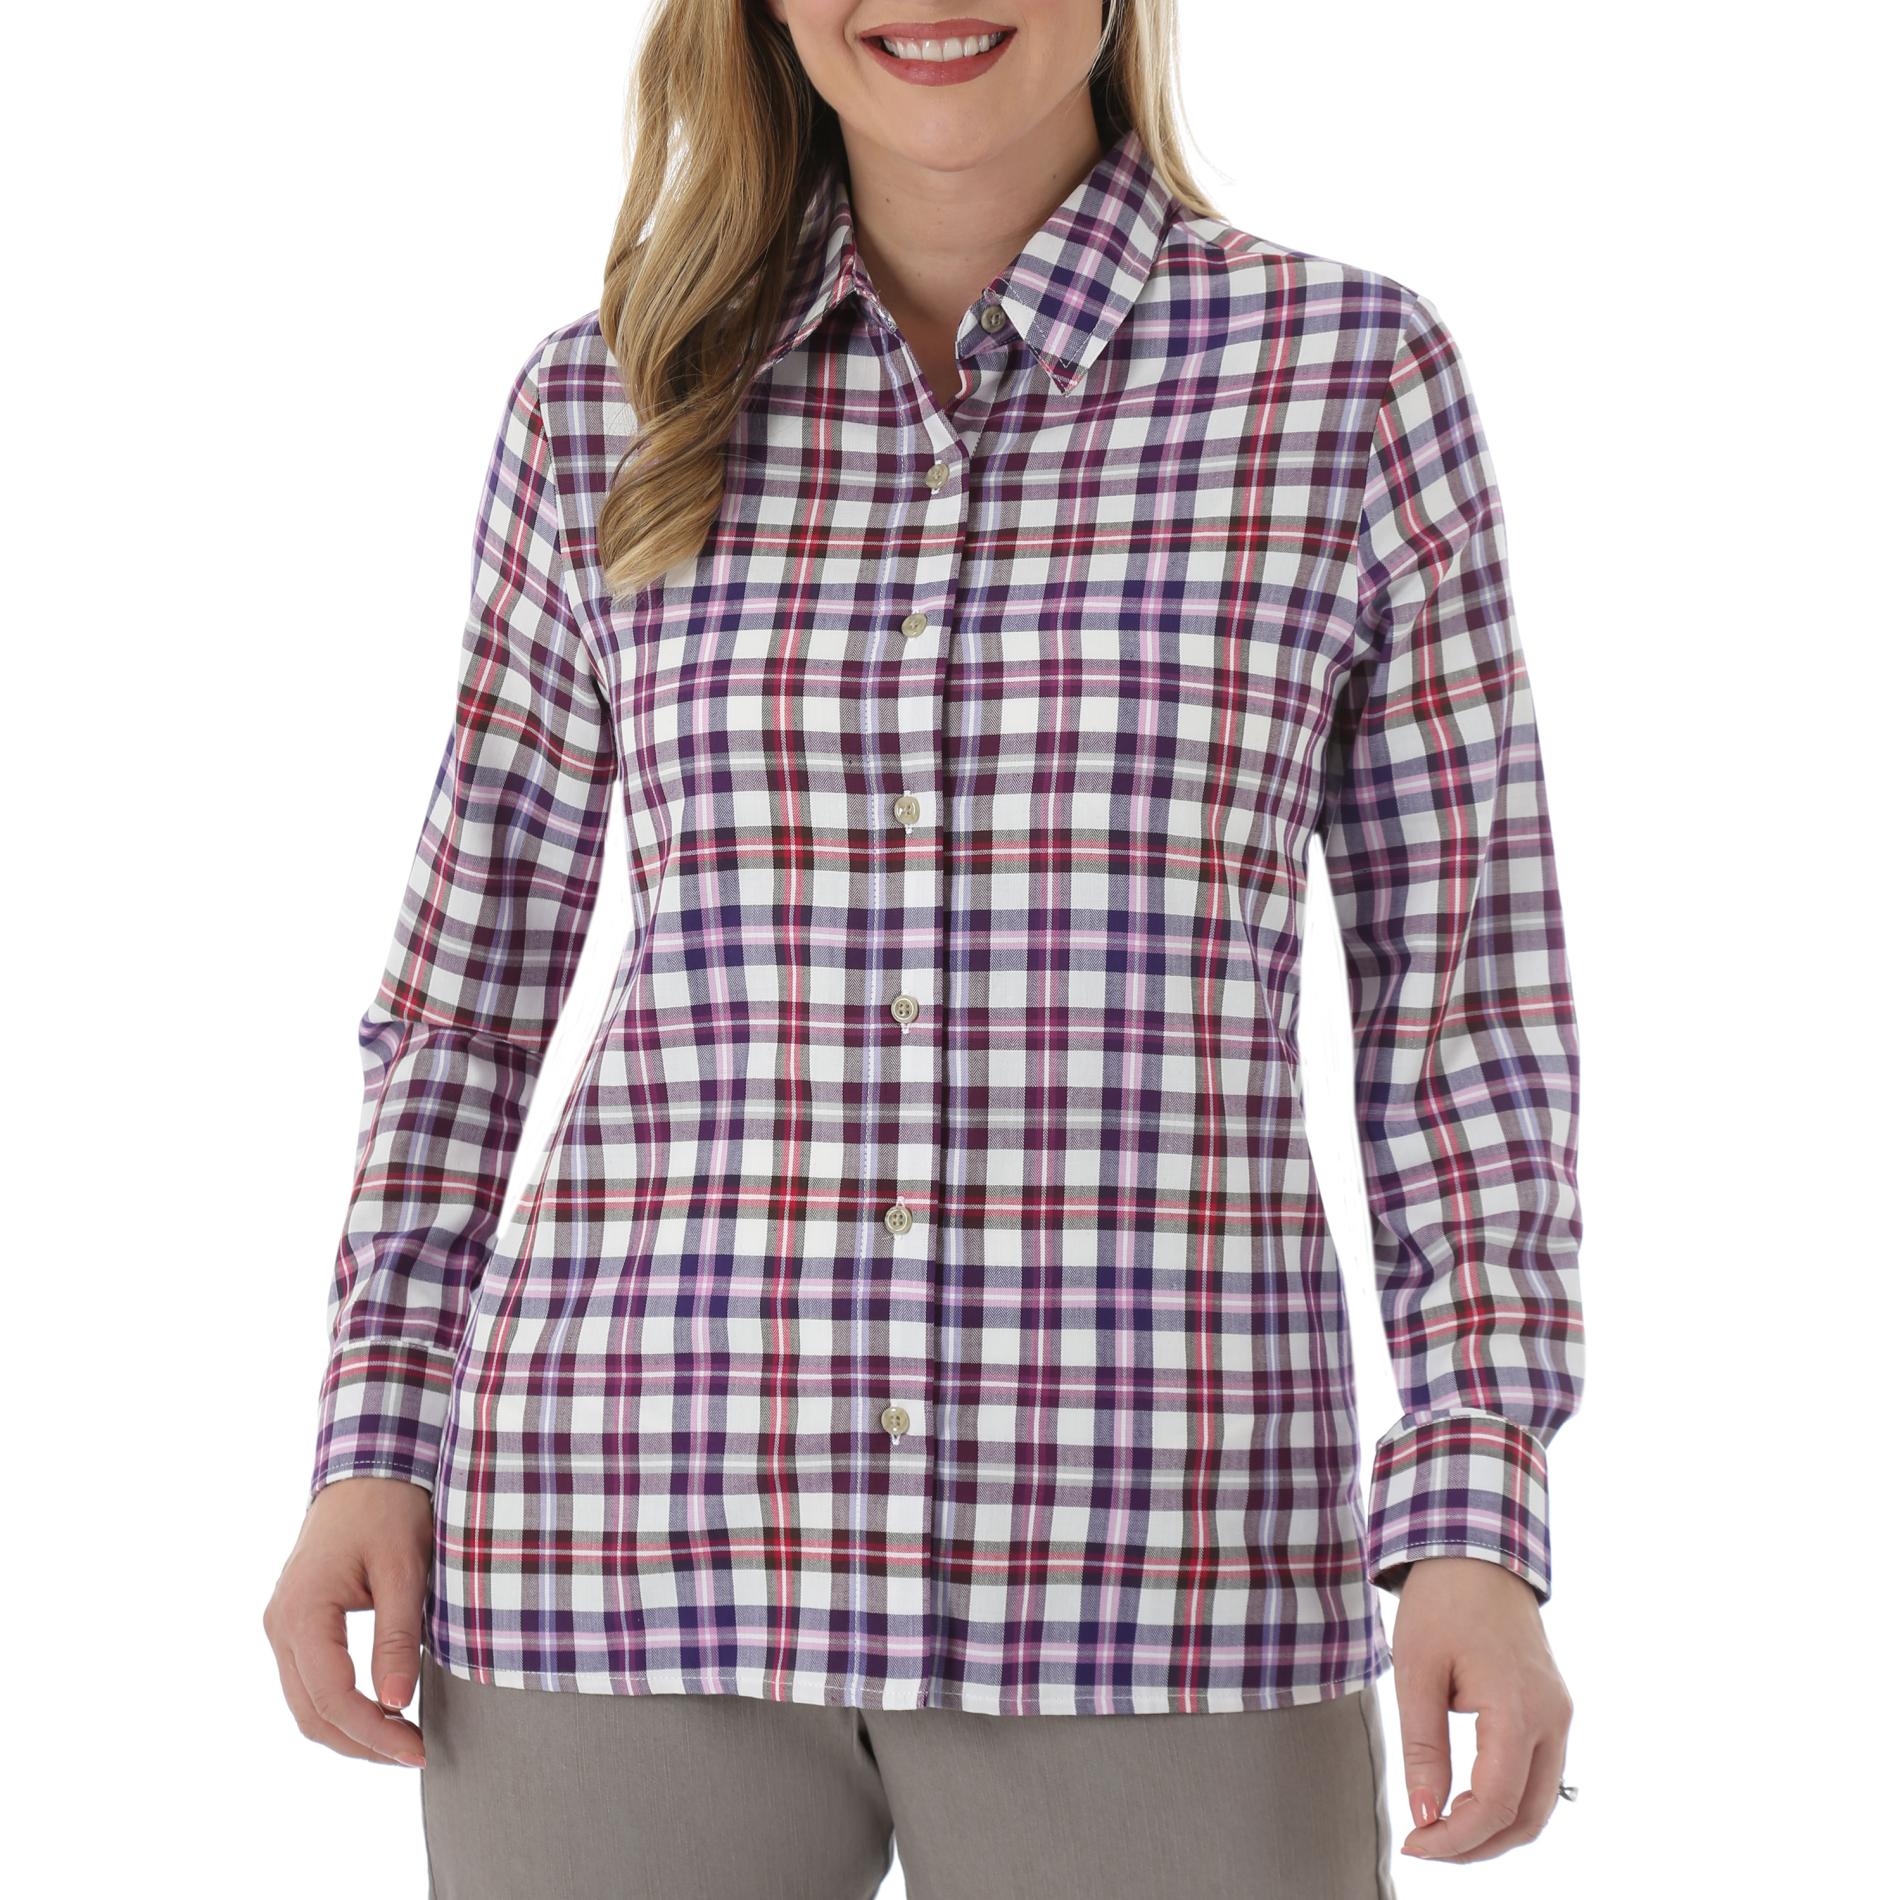 Riders by Lee Women's Connie Woven Shirt - Plaid